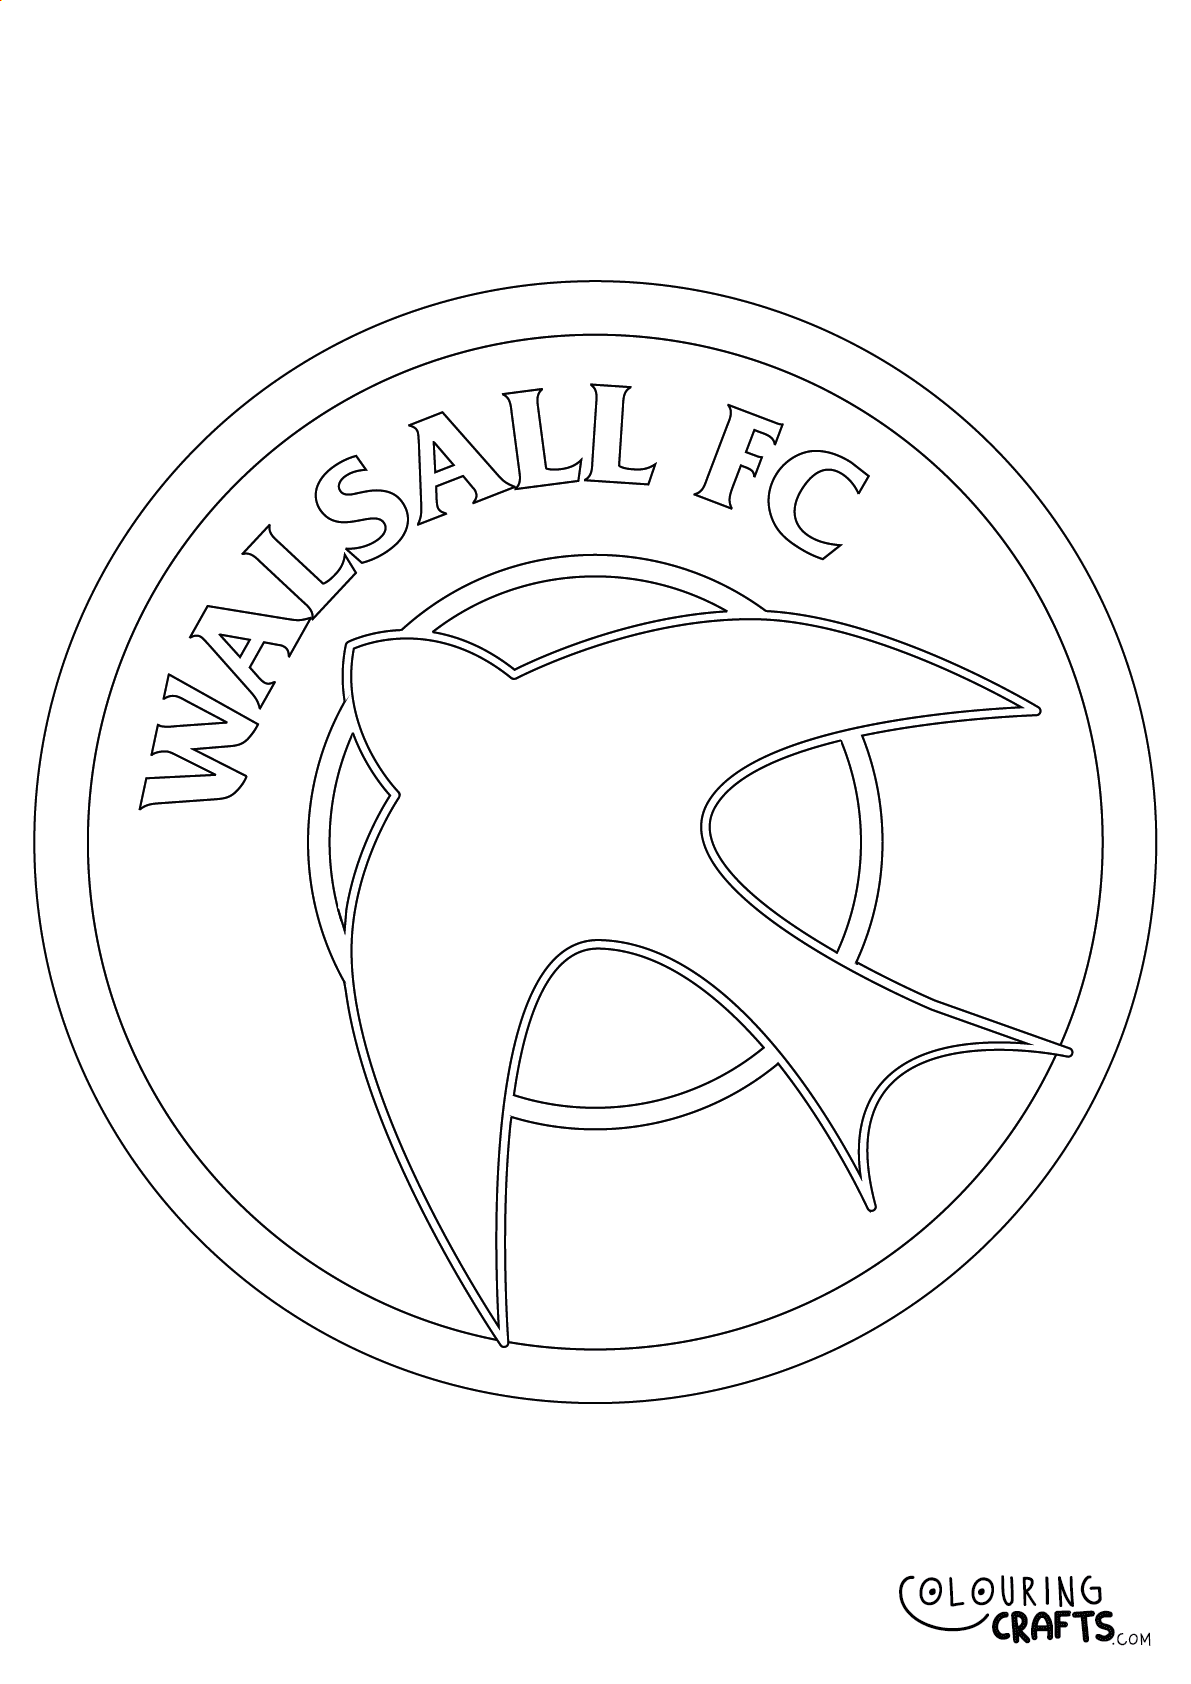 Walsall FC Badge Printable Colouring Page - Colouring Crafts